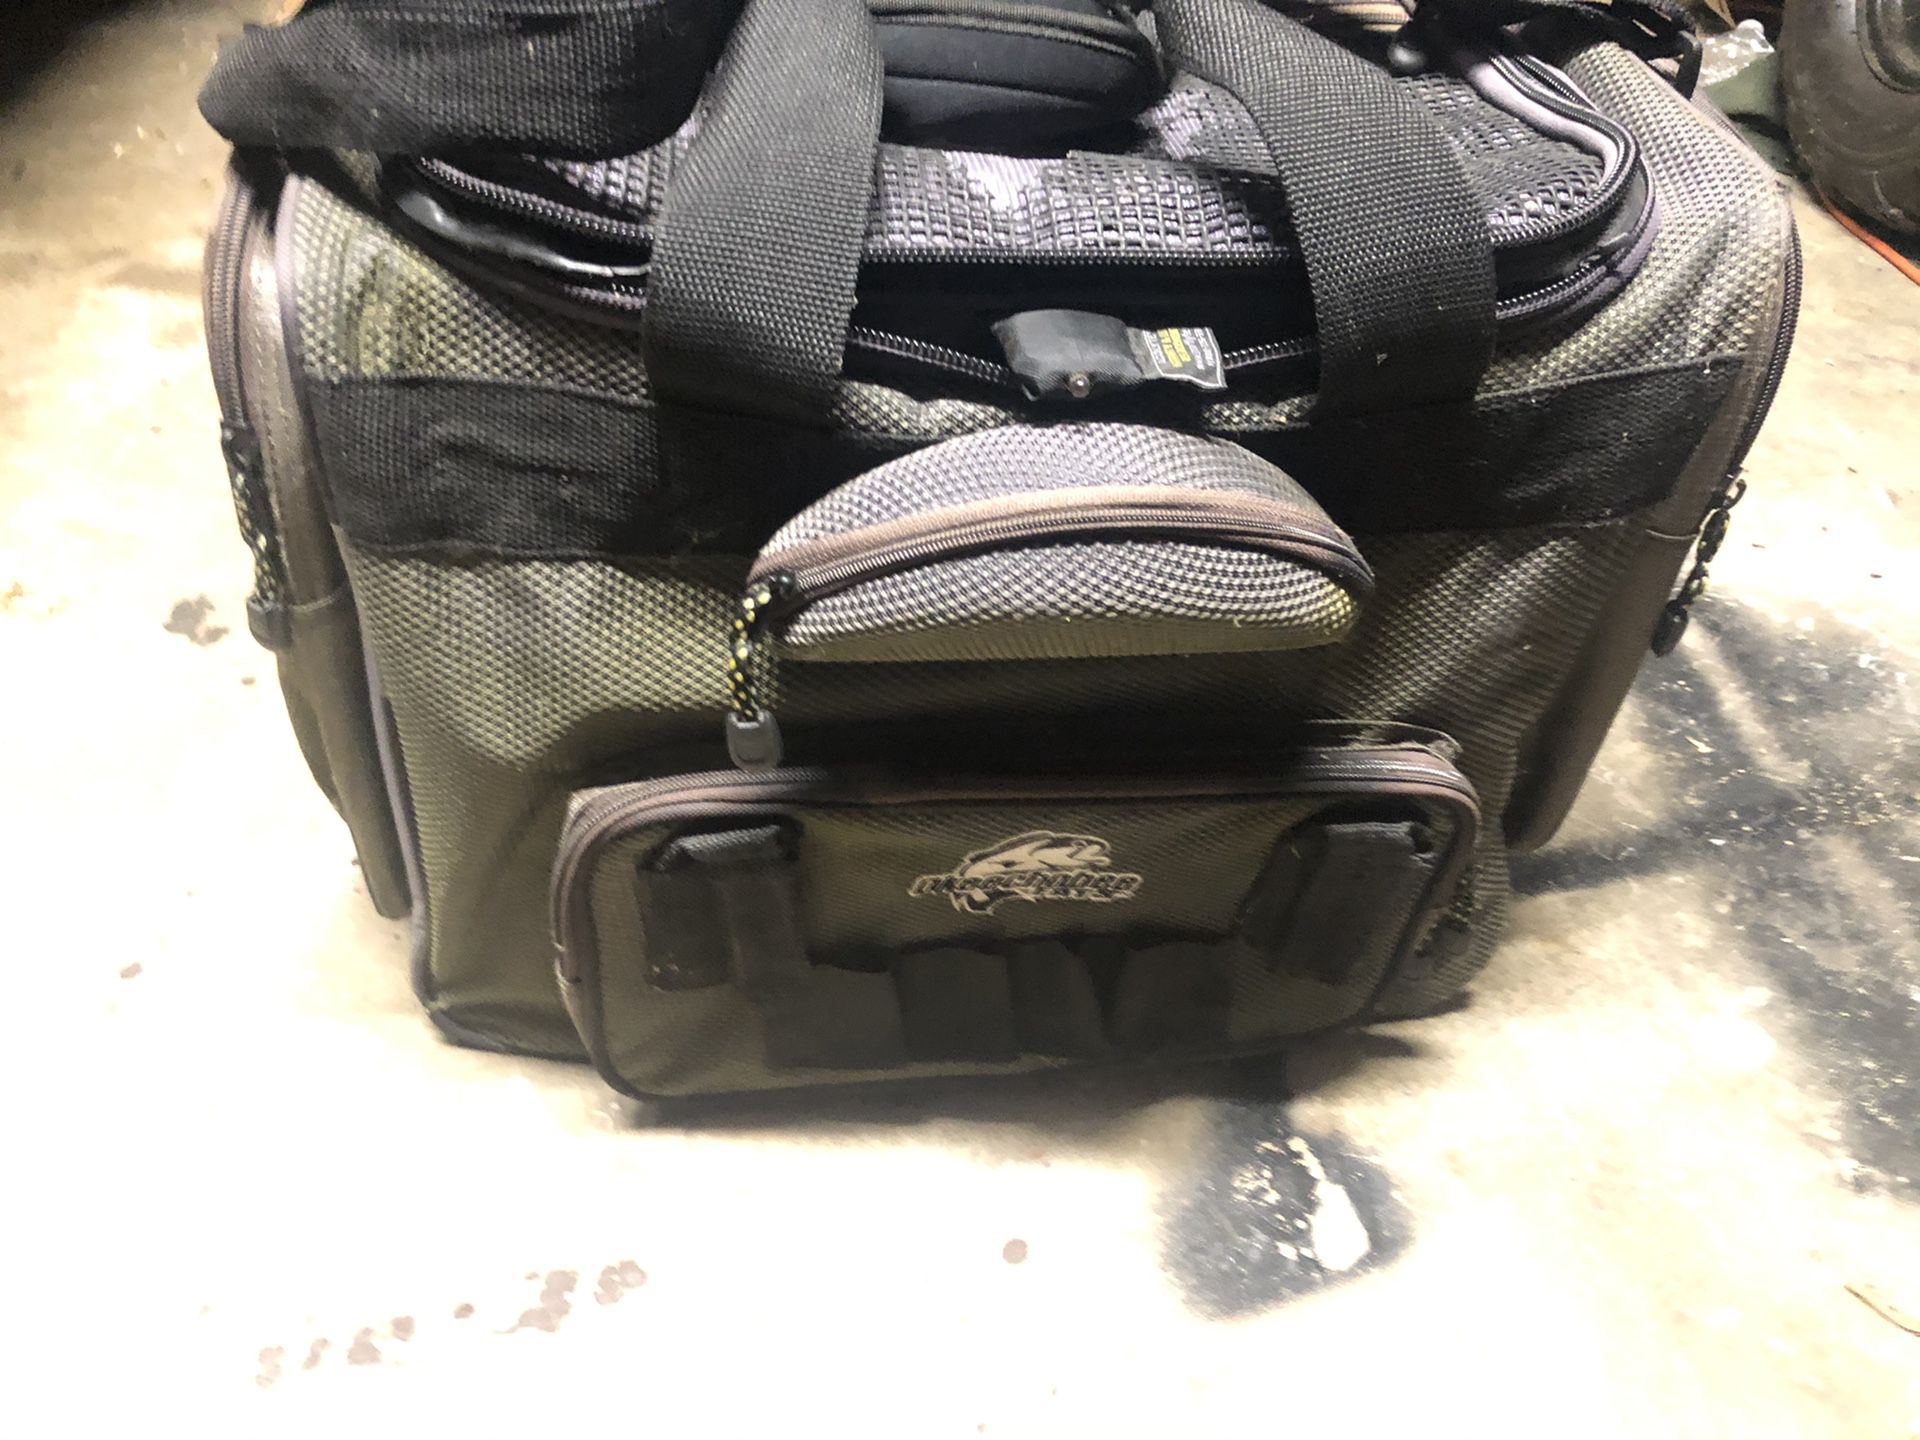 Tackle bag/box has 7-8 containers